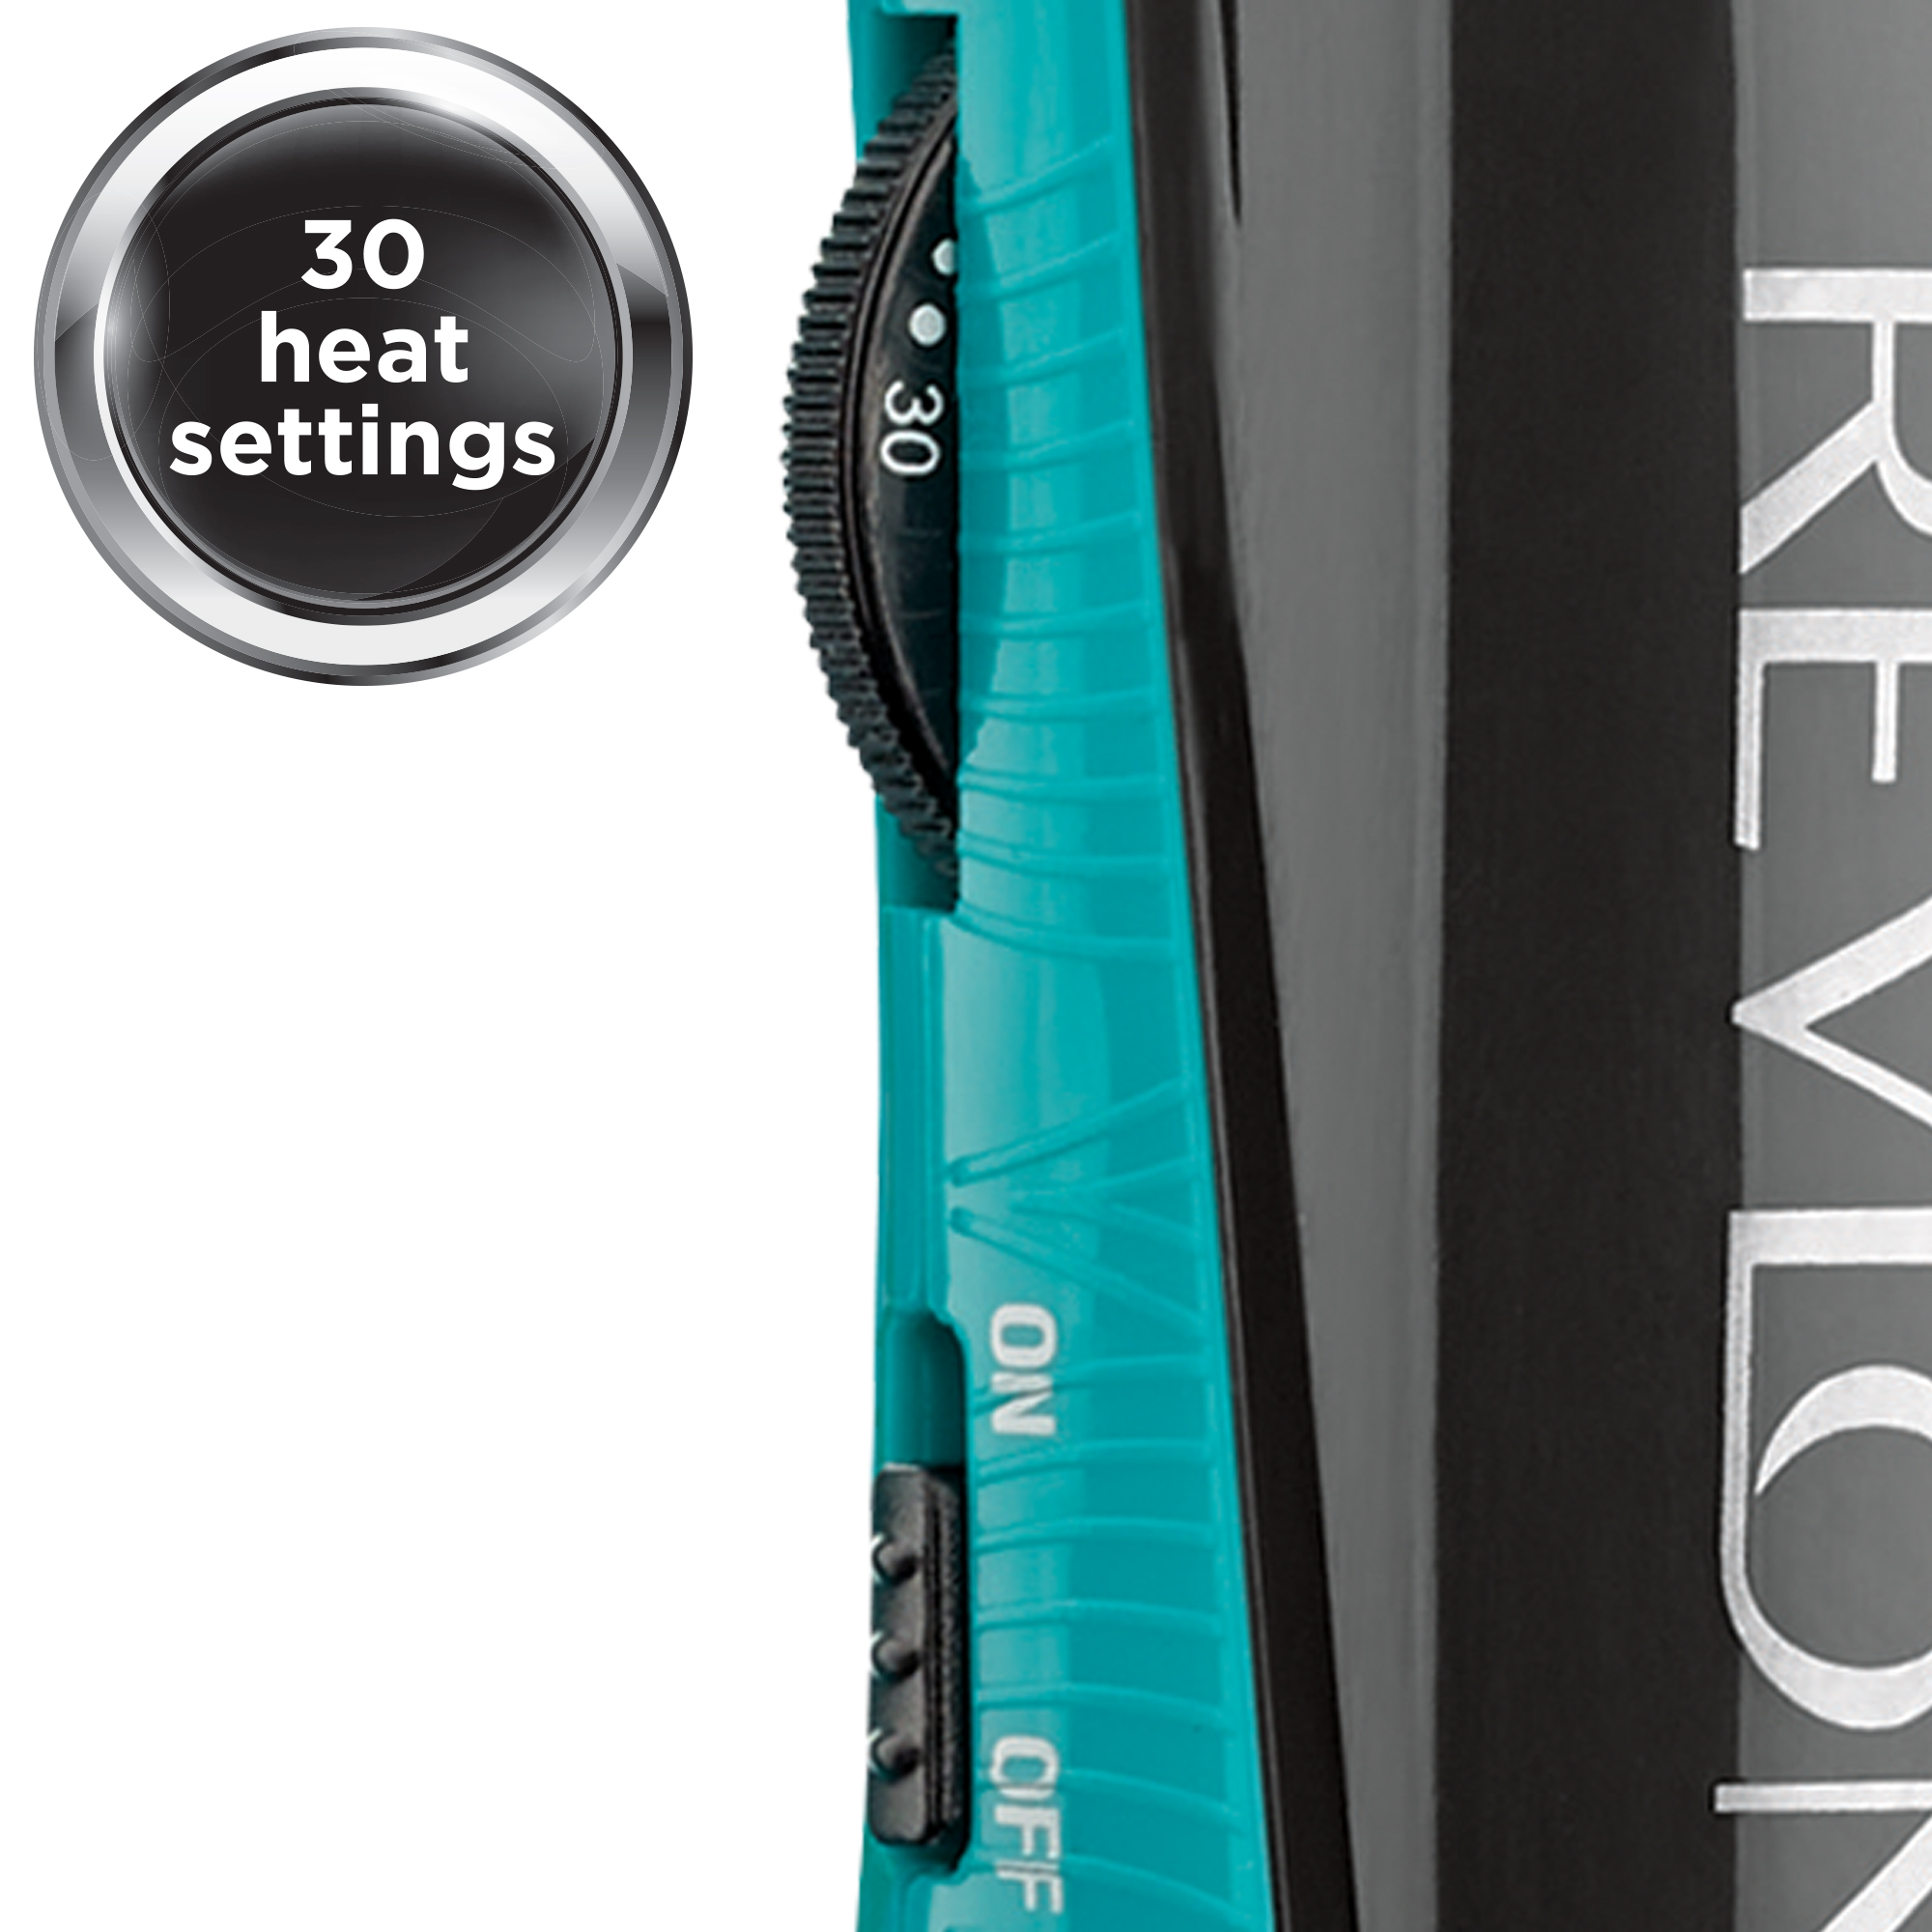 Revlon Perfect Heat Ceramic Tapered Curling Wand, Teal with Protective Glove - image 3 of 6